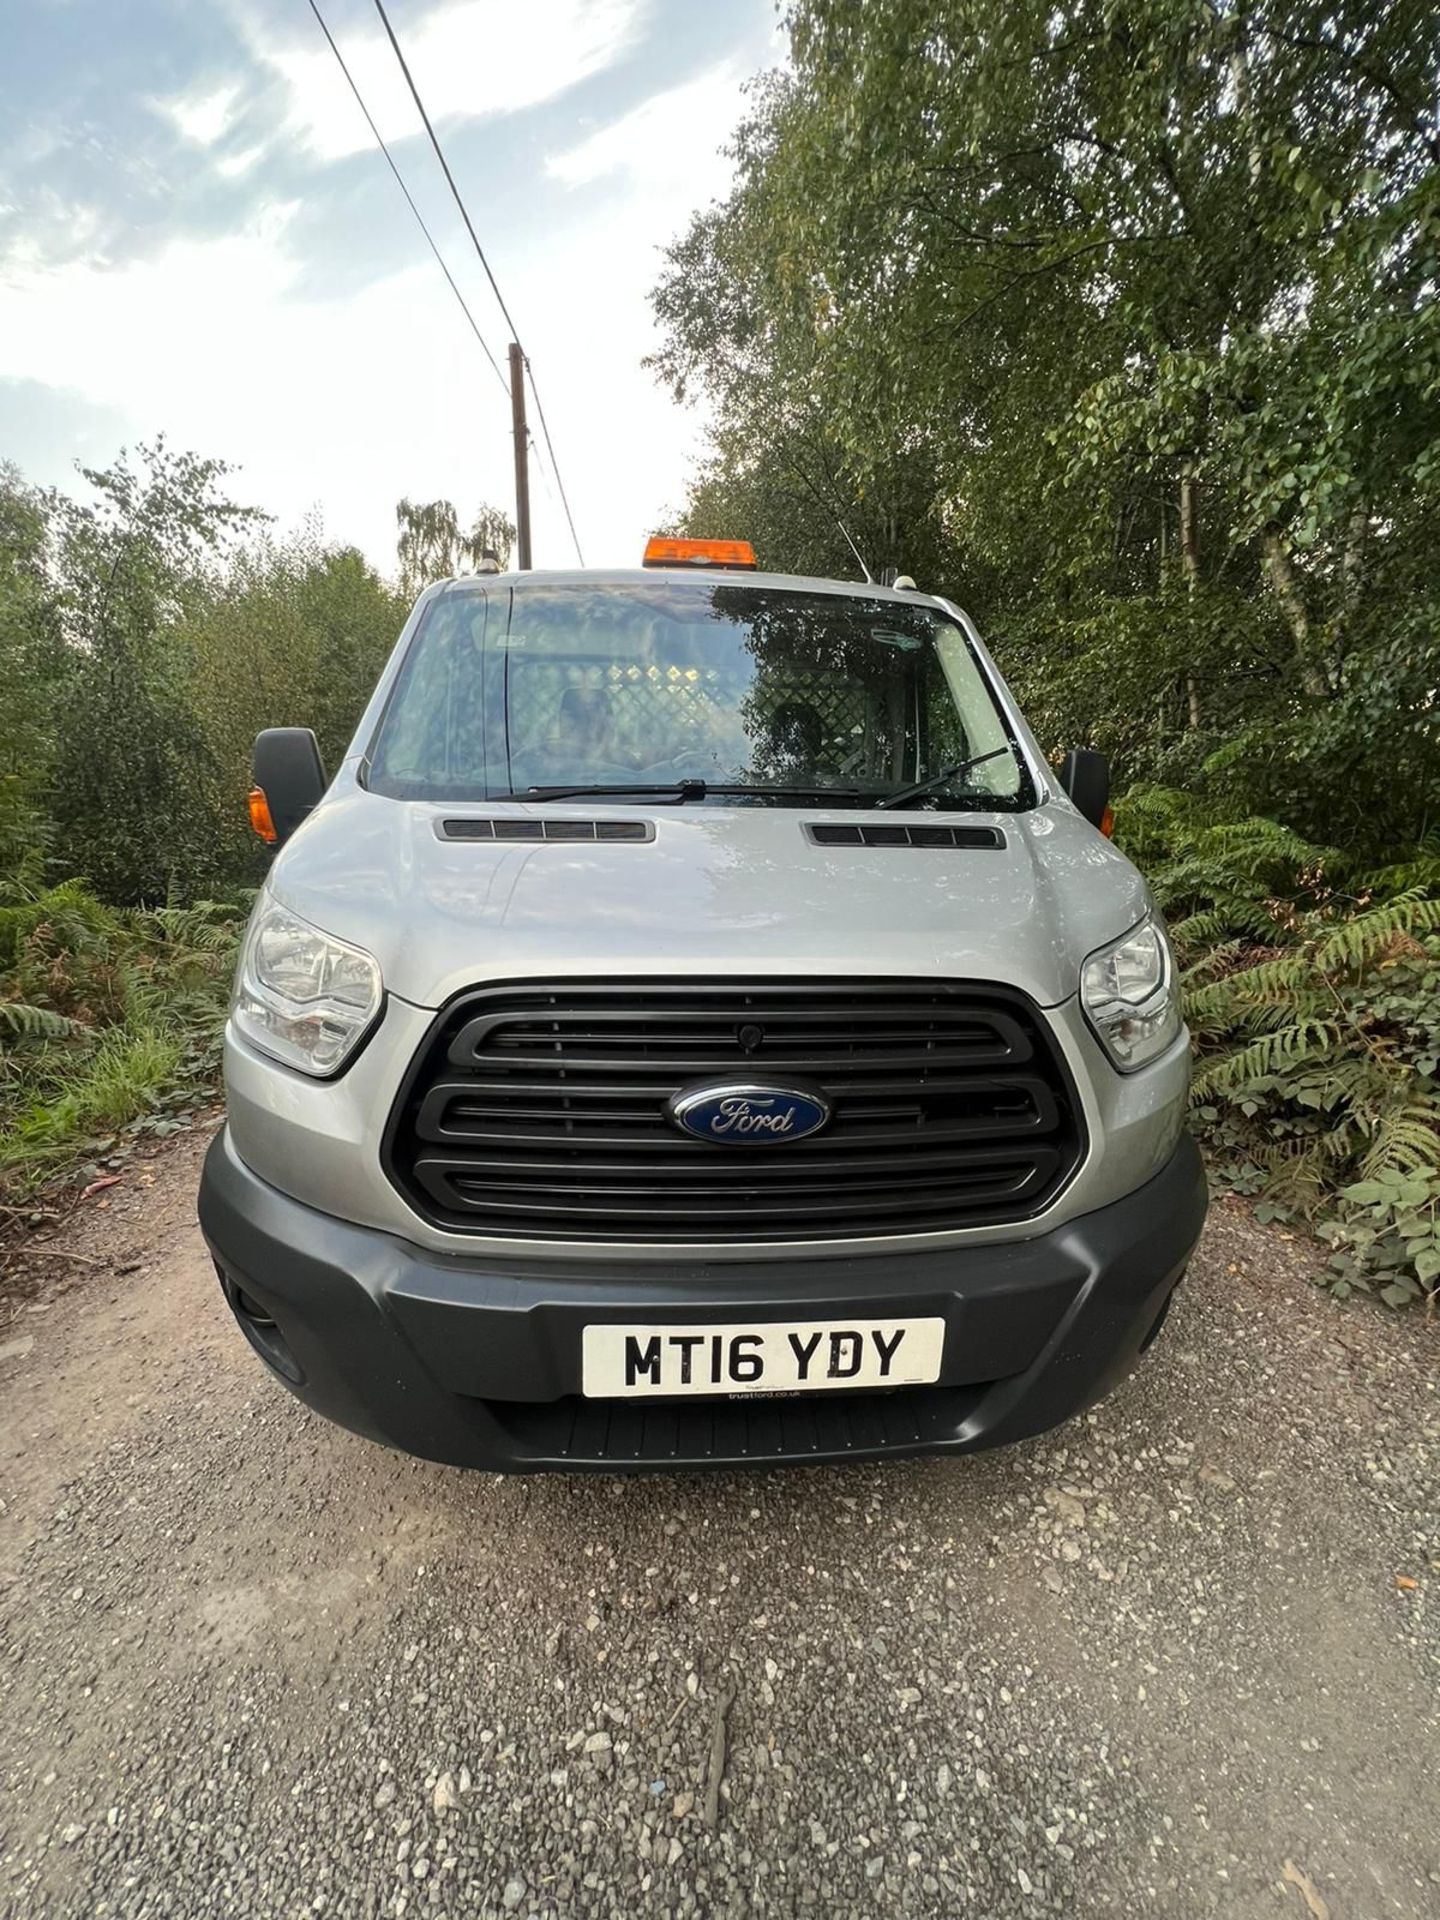 FORD TRANSIT 2016 FLATBED WITH TAIL LIFT 14 FT DROPSIDE BODY - Image 7 of 15